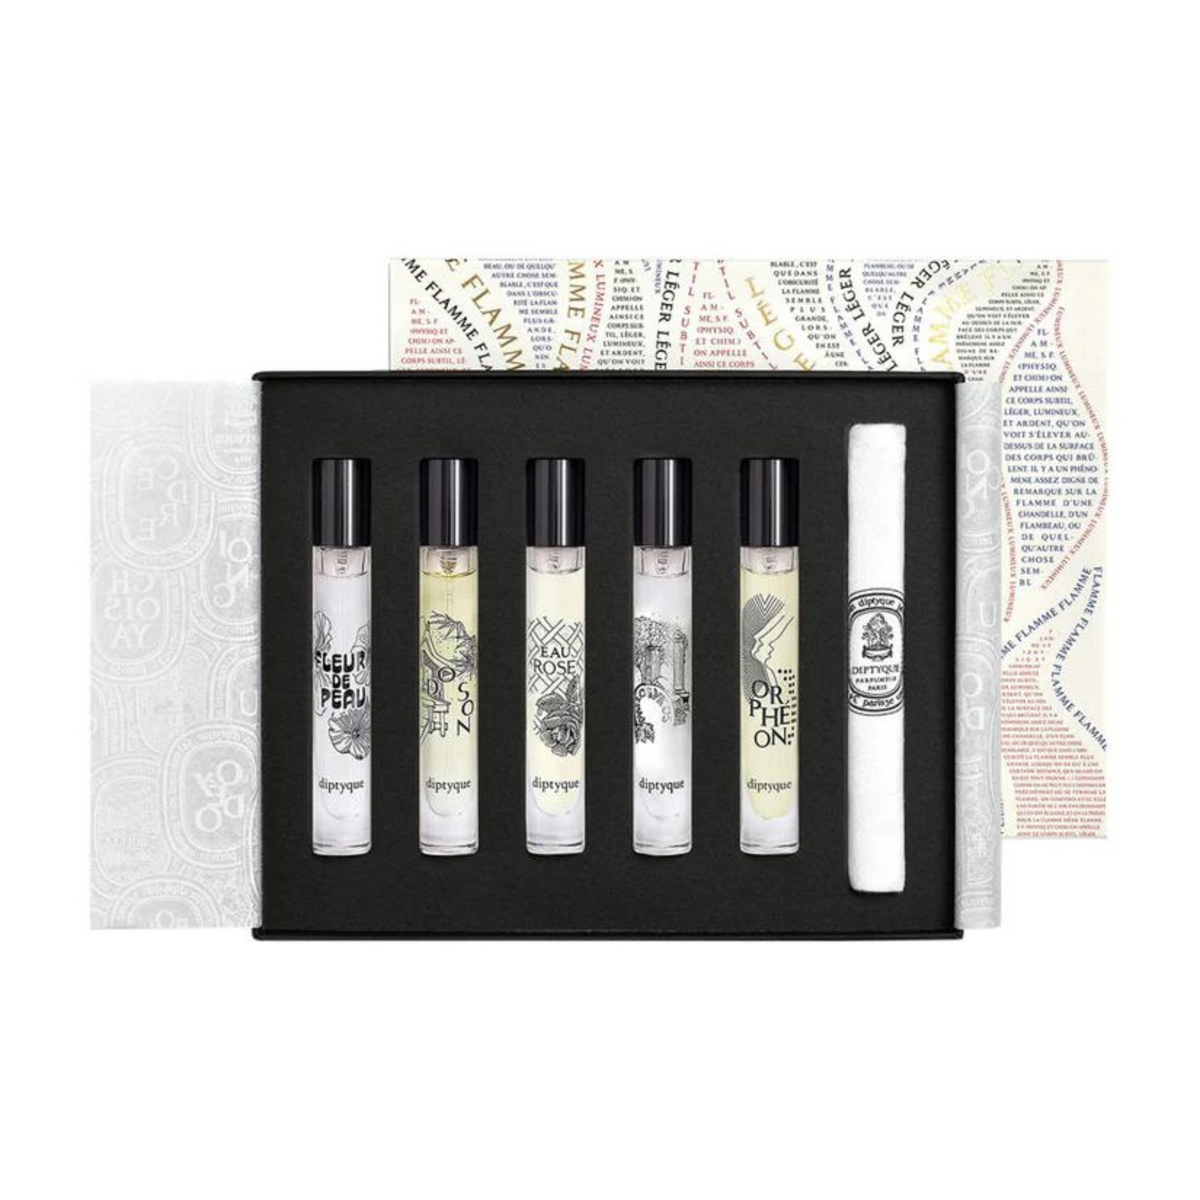 Primary Image of Holiday EDT Discovery Kit